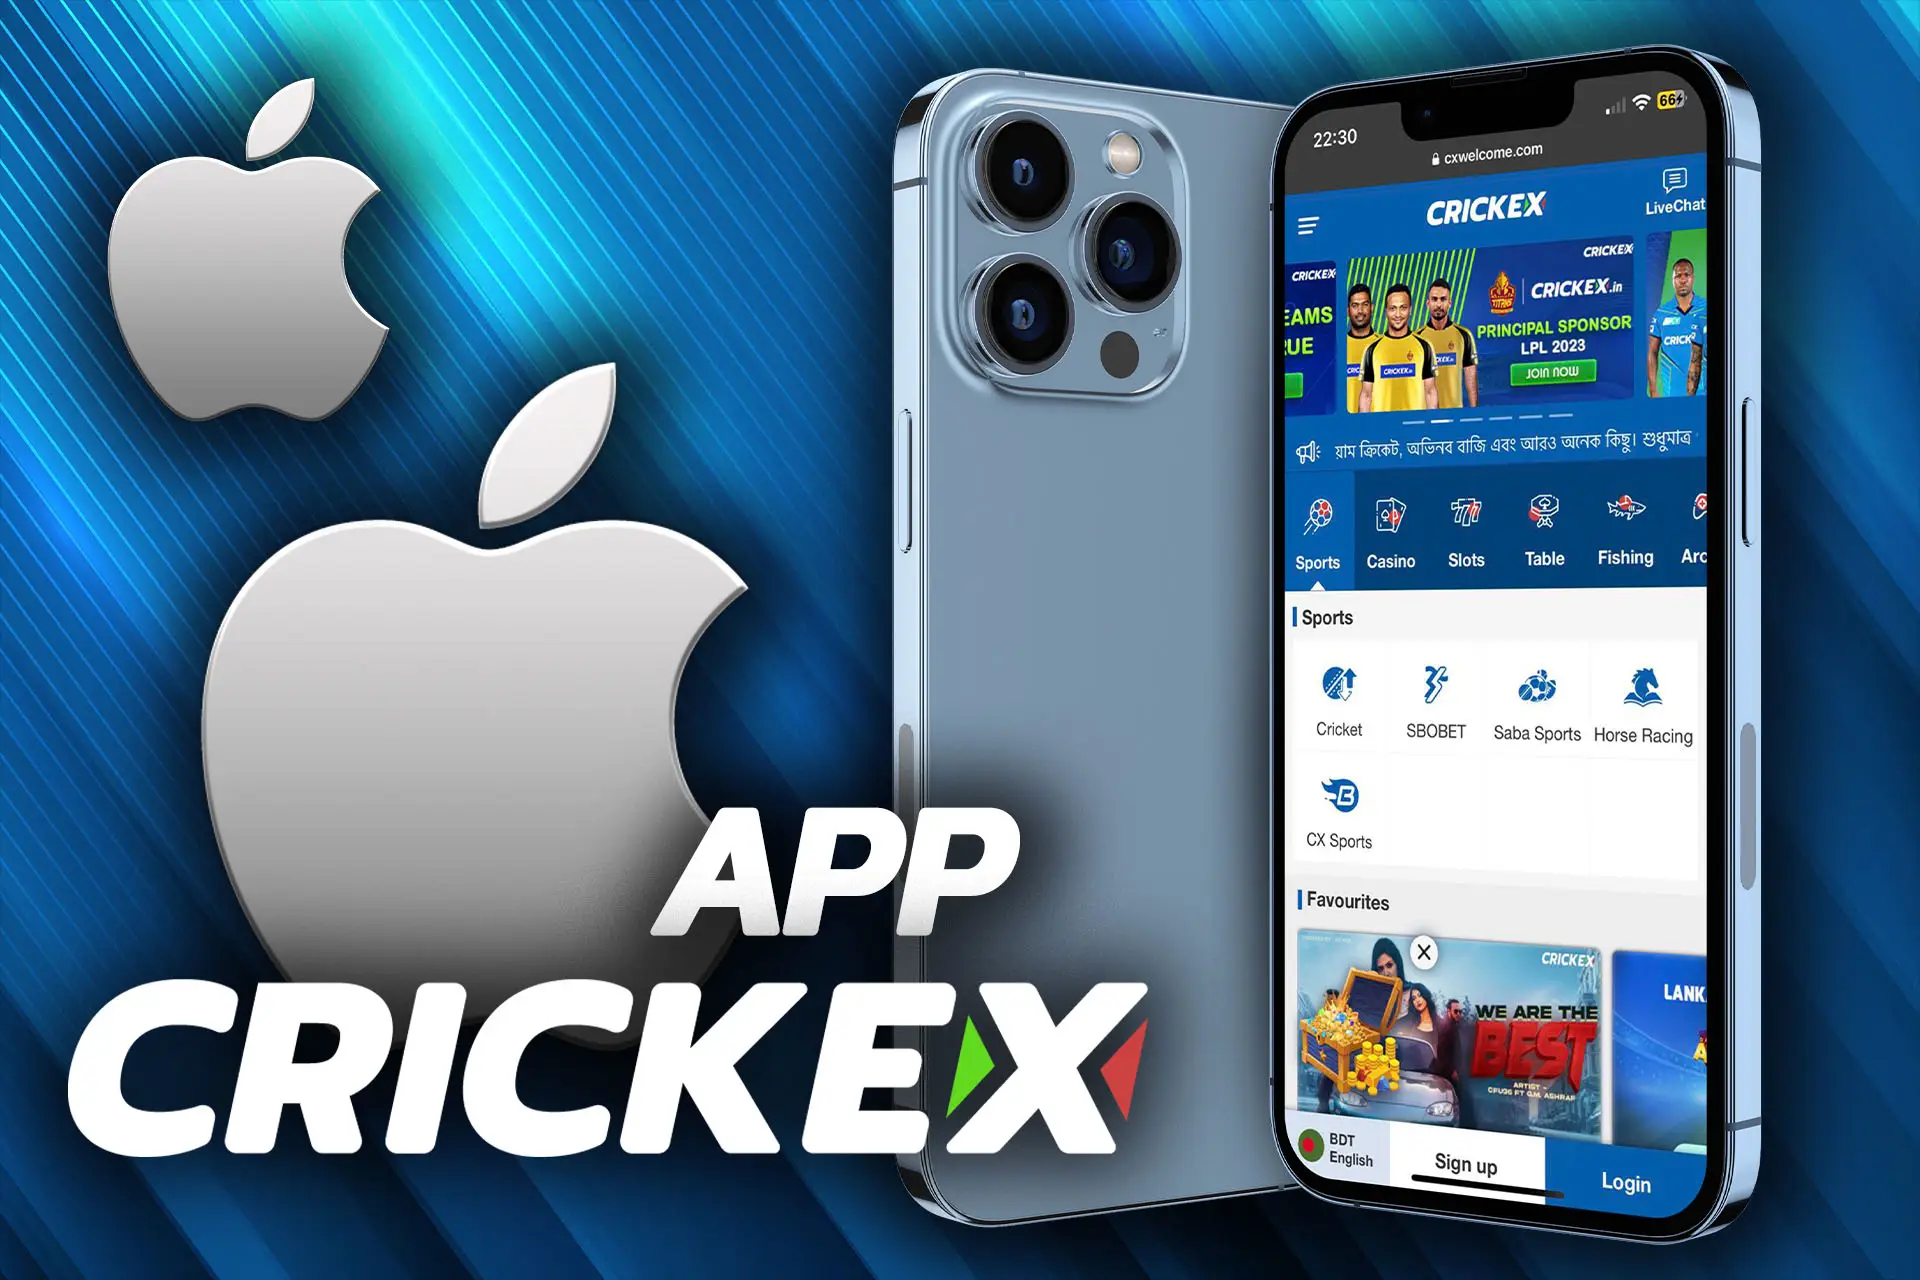 You can use browser version of Crickex on your iPhone, that has the same features.